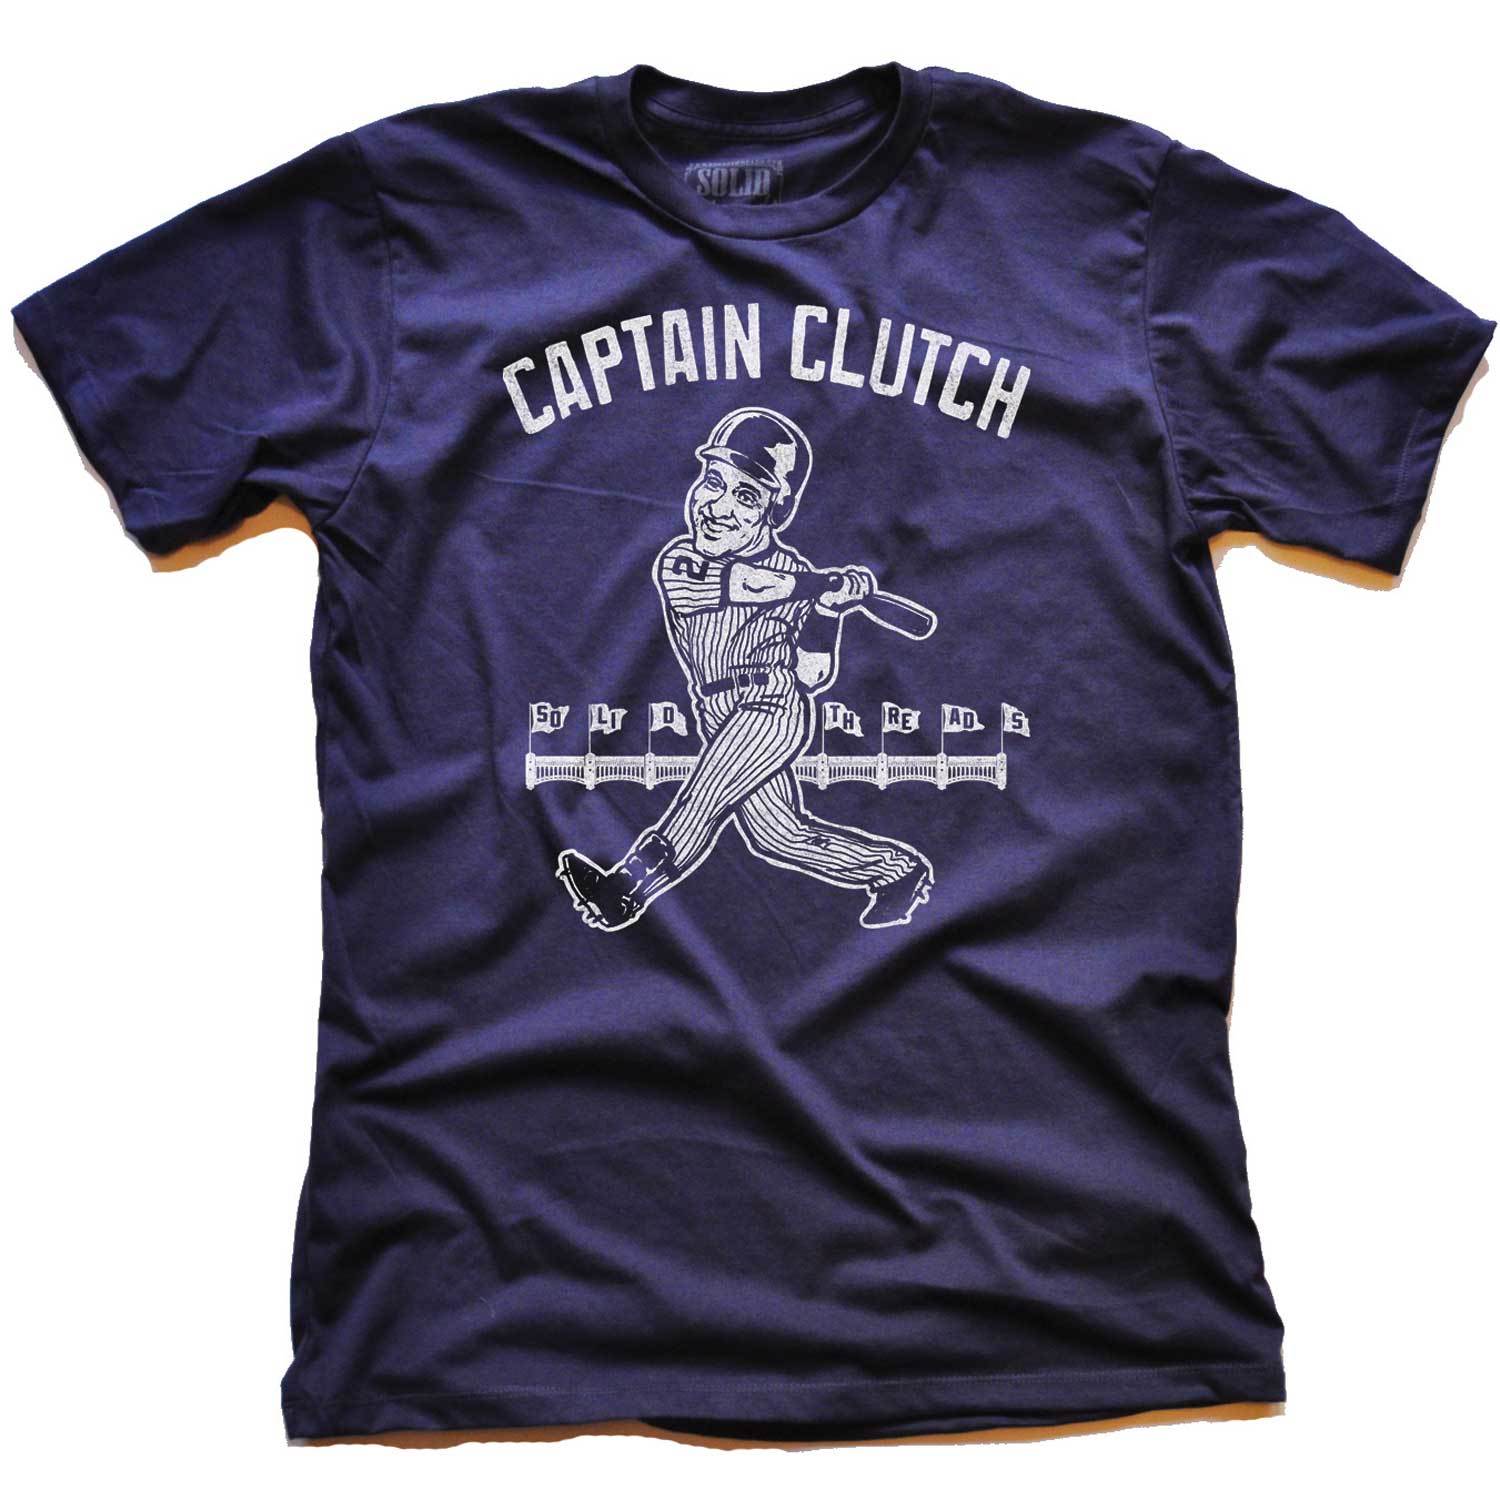 Men's Captain Clutch Vintage Inspired tee-shirt with cool, Derek Jeter graphic | Solid Threads